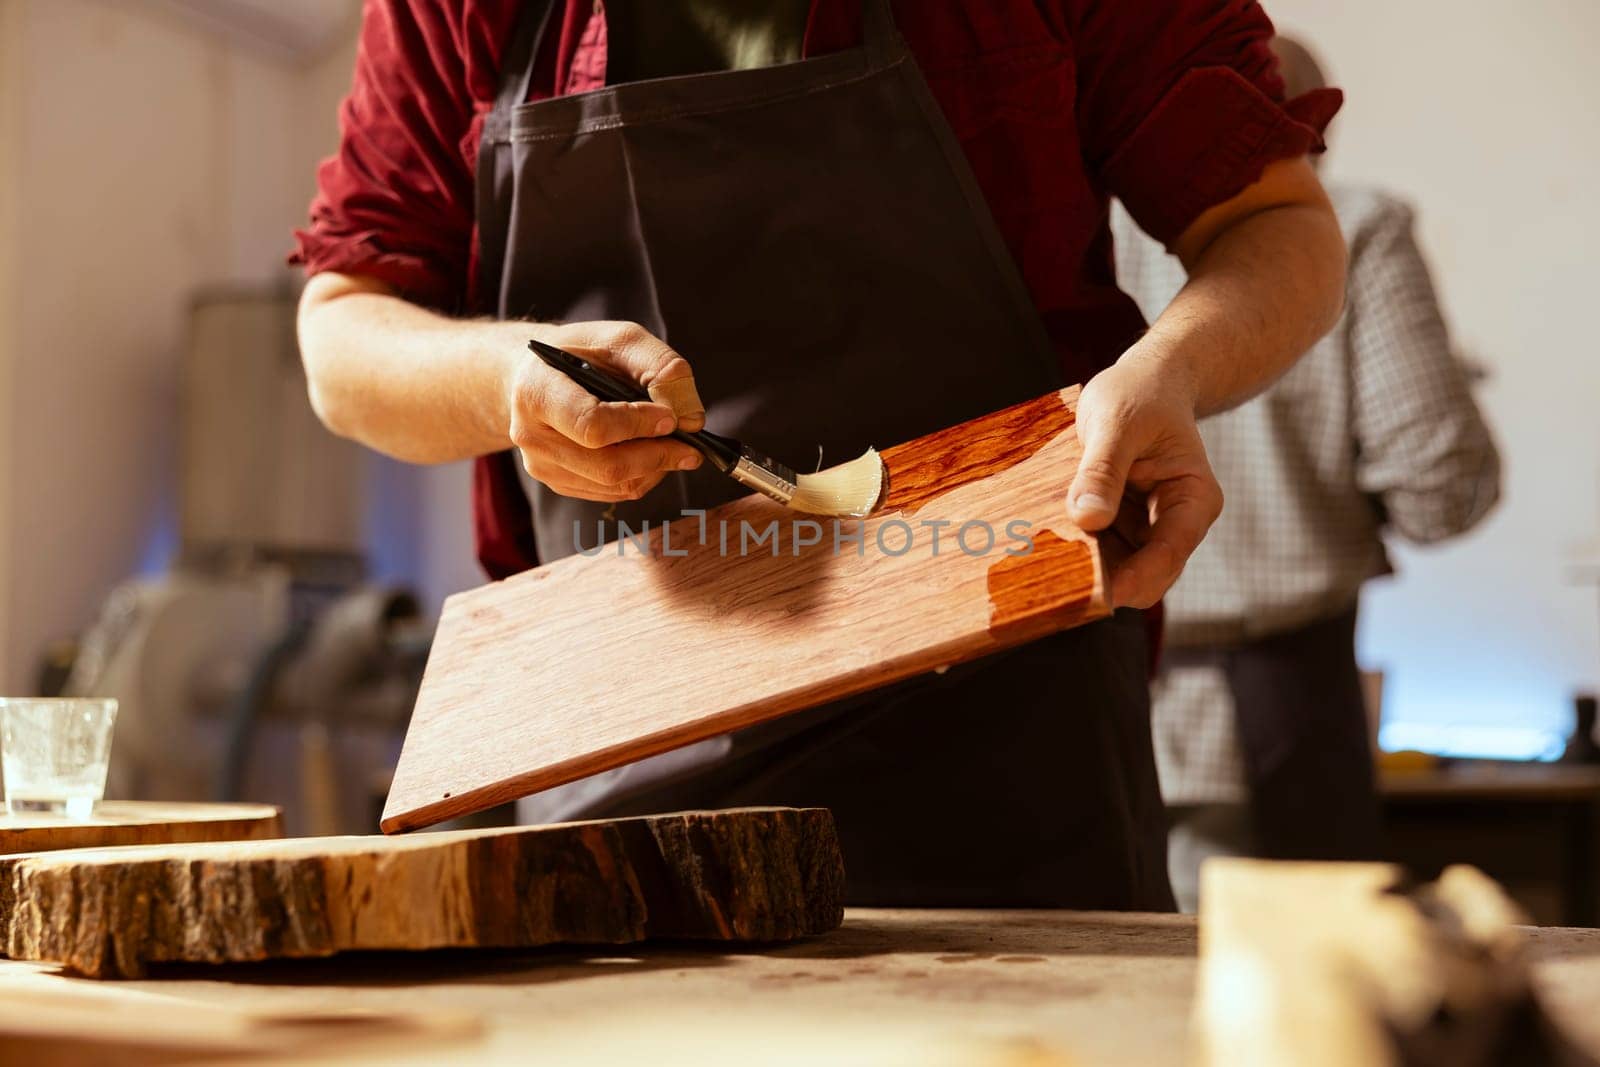 Woodworking specialist lacquering wooden board by DCStudio